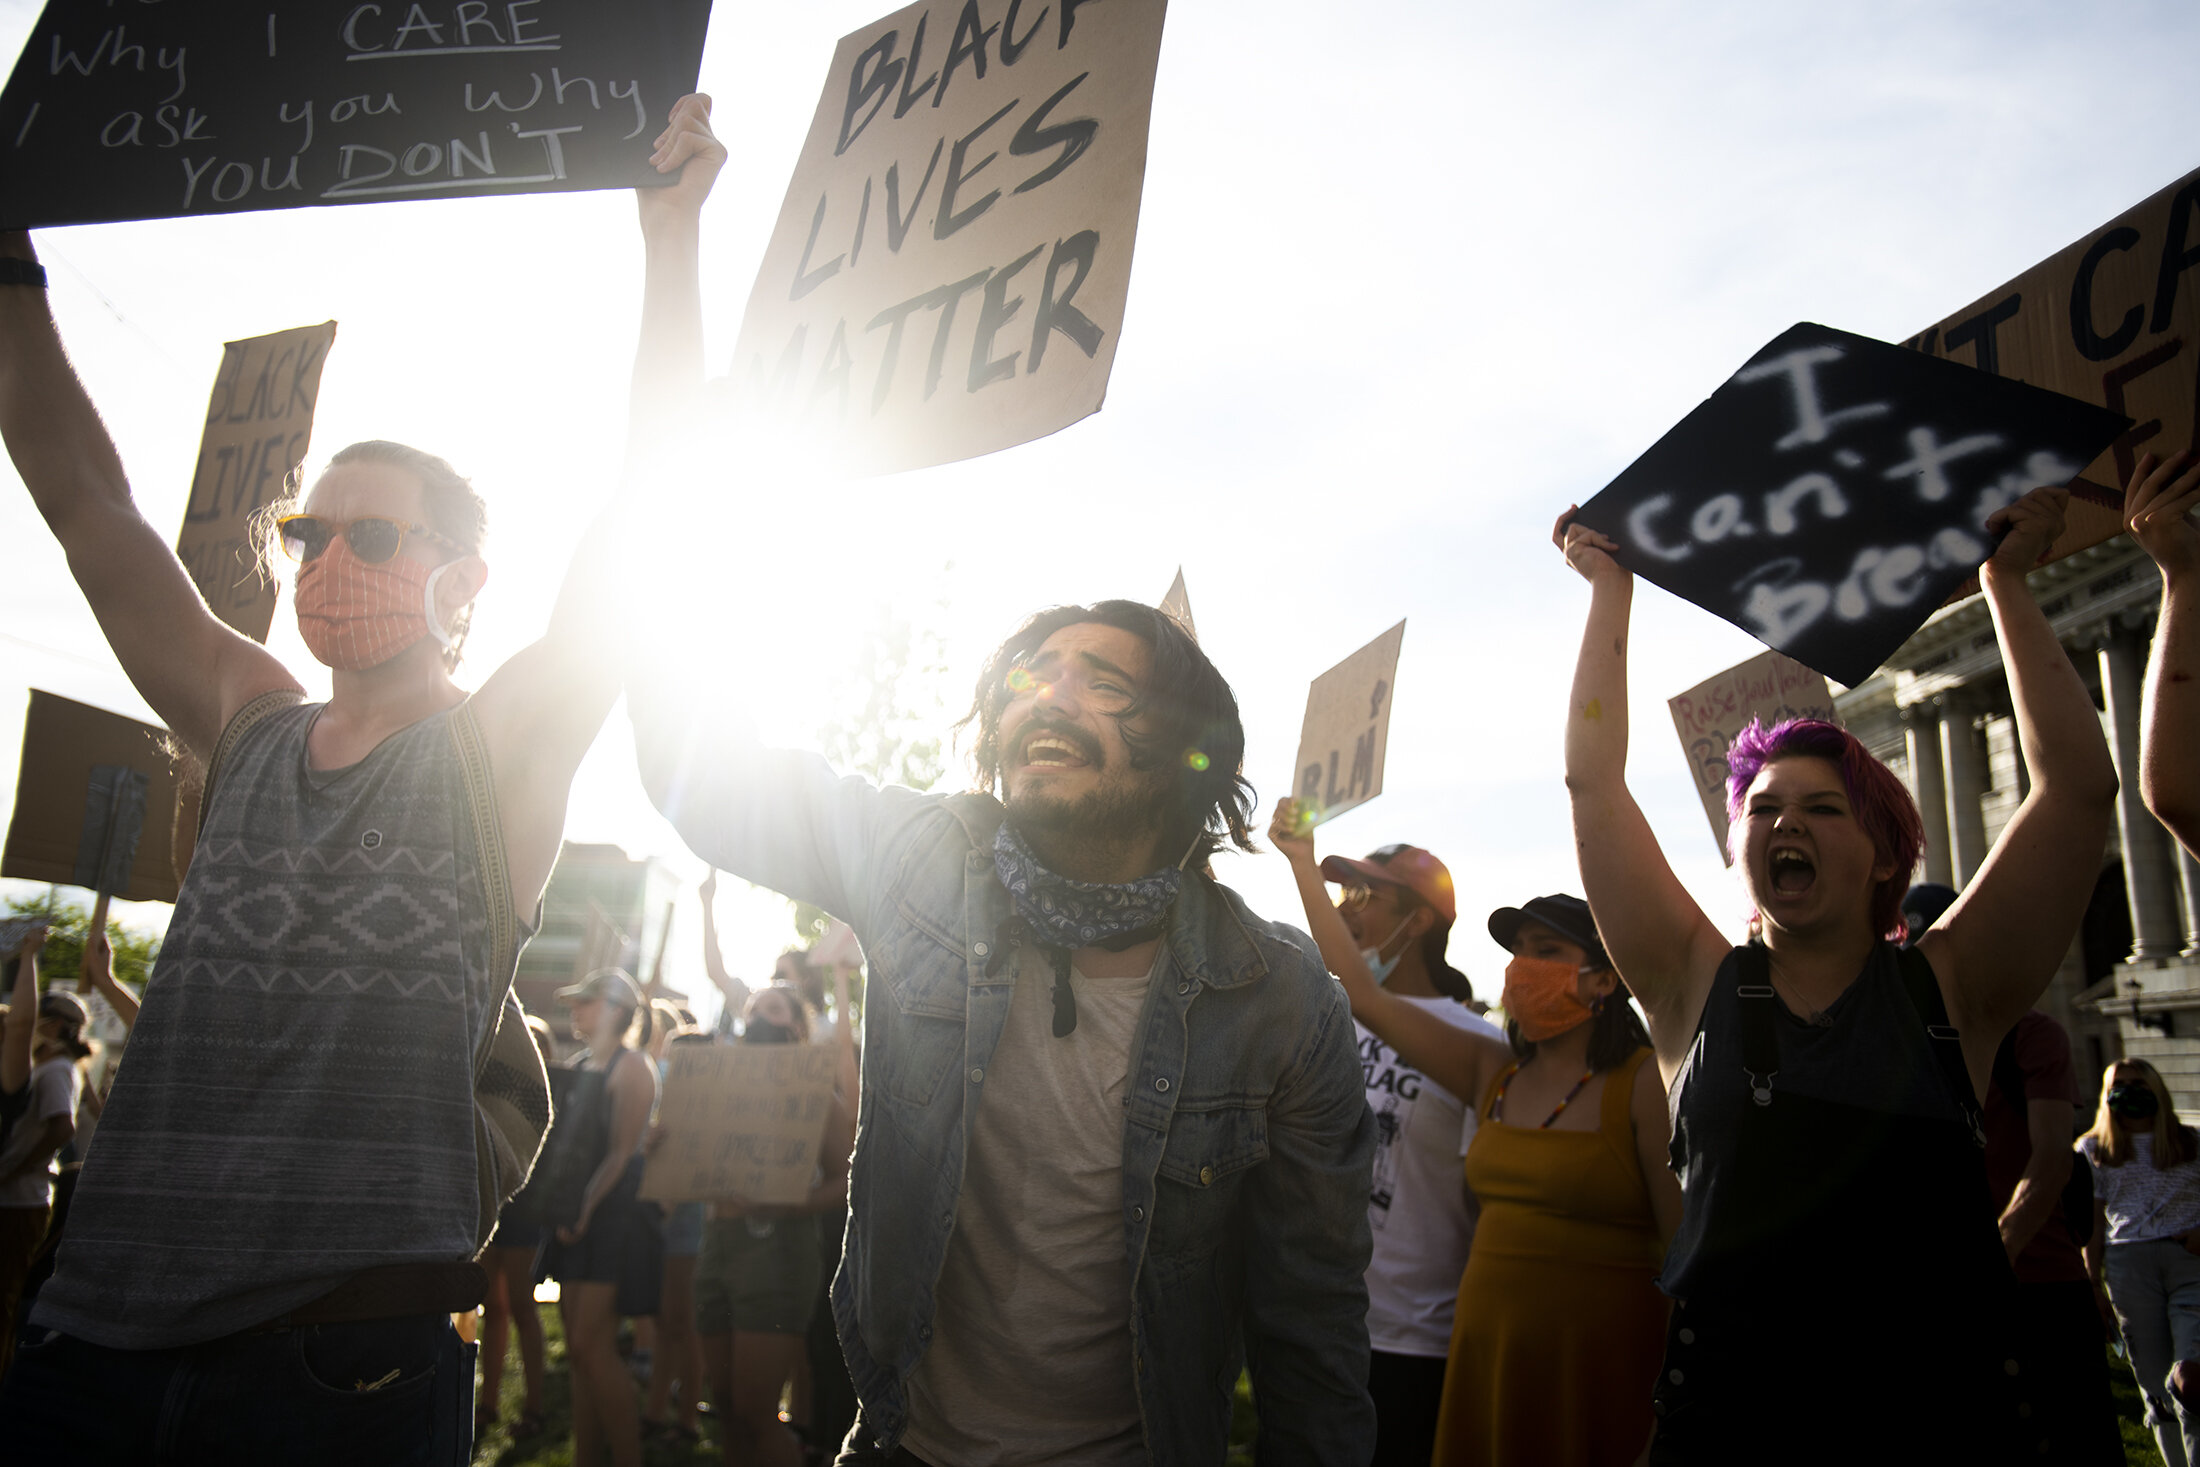  Miguel Angel Olivas, an opera singer in Missoula, screams out "I can't breathe!" alongside hundreds of protesters on the Missoula County Courthouse, June 6, 2020 in Missoula, Mont. Olivas said he's tired of the racism that he's experienced in variou